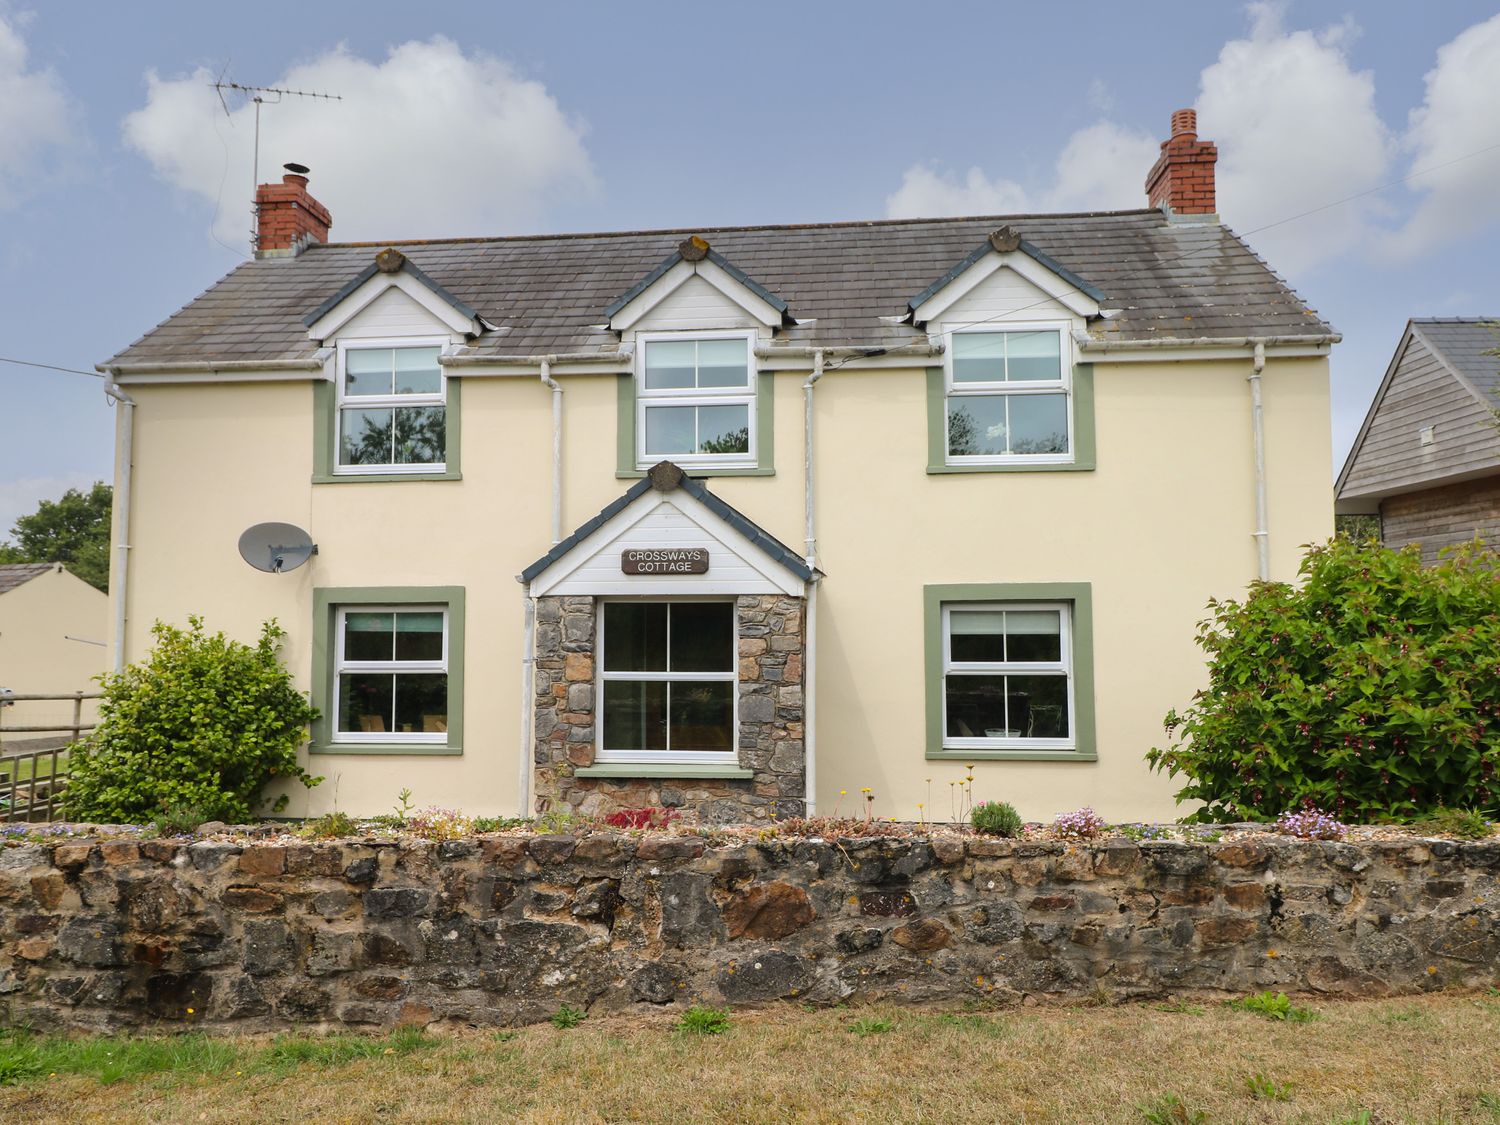 Crossways Cottage - South Wales - 1136875 - photo 1